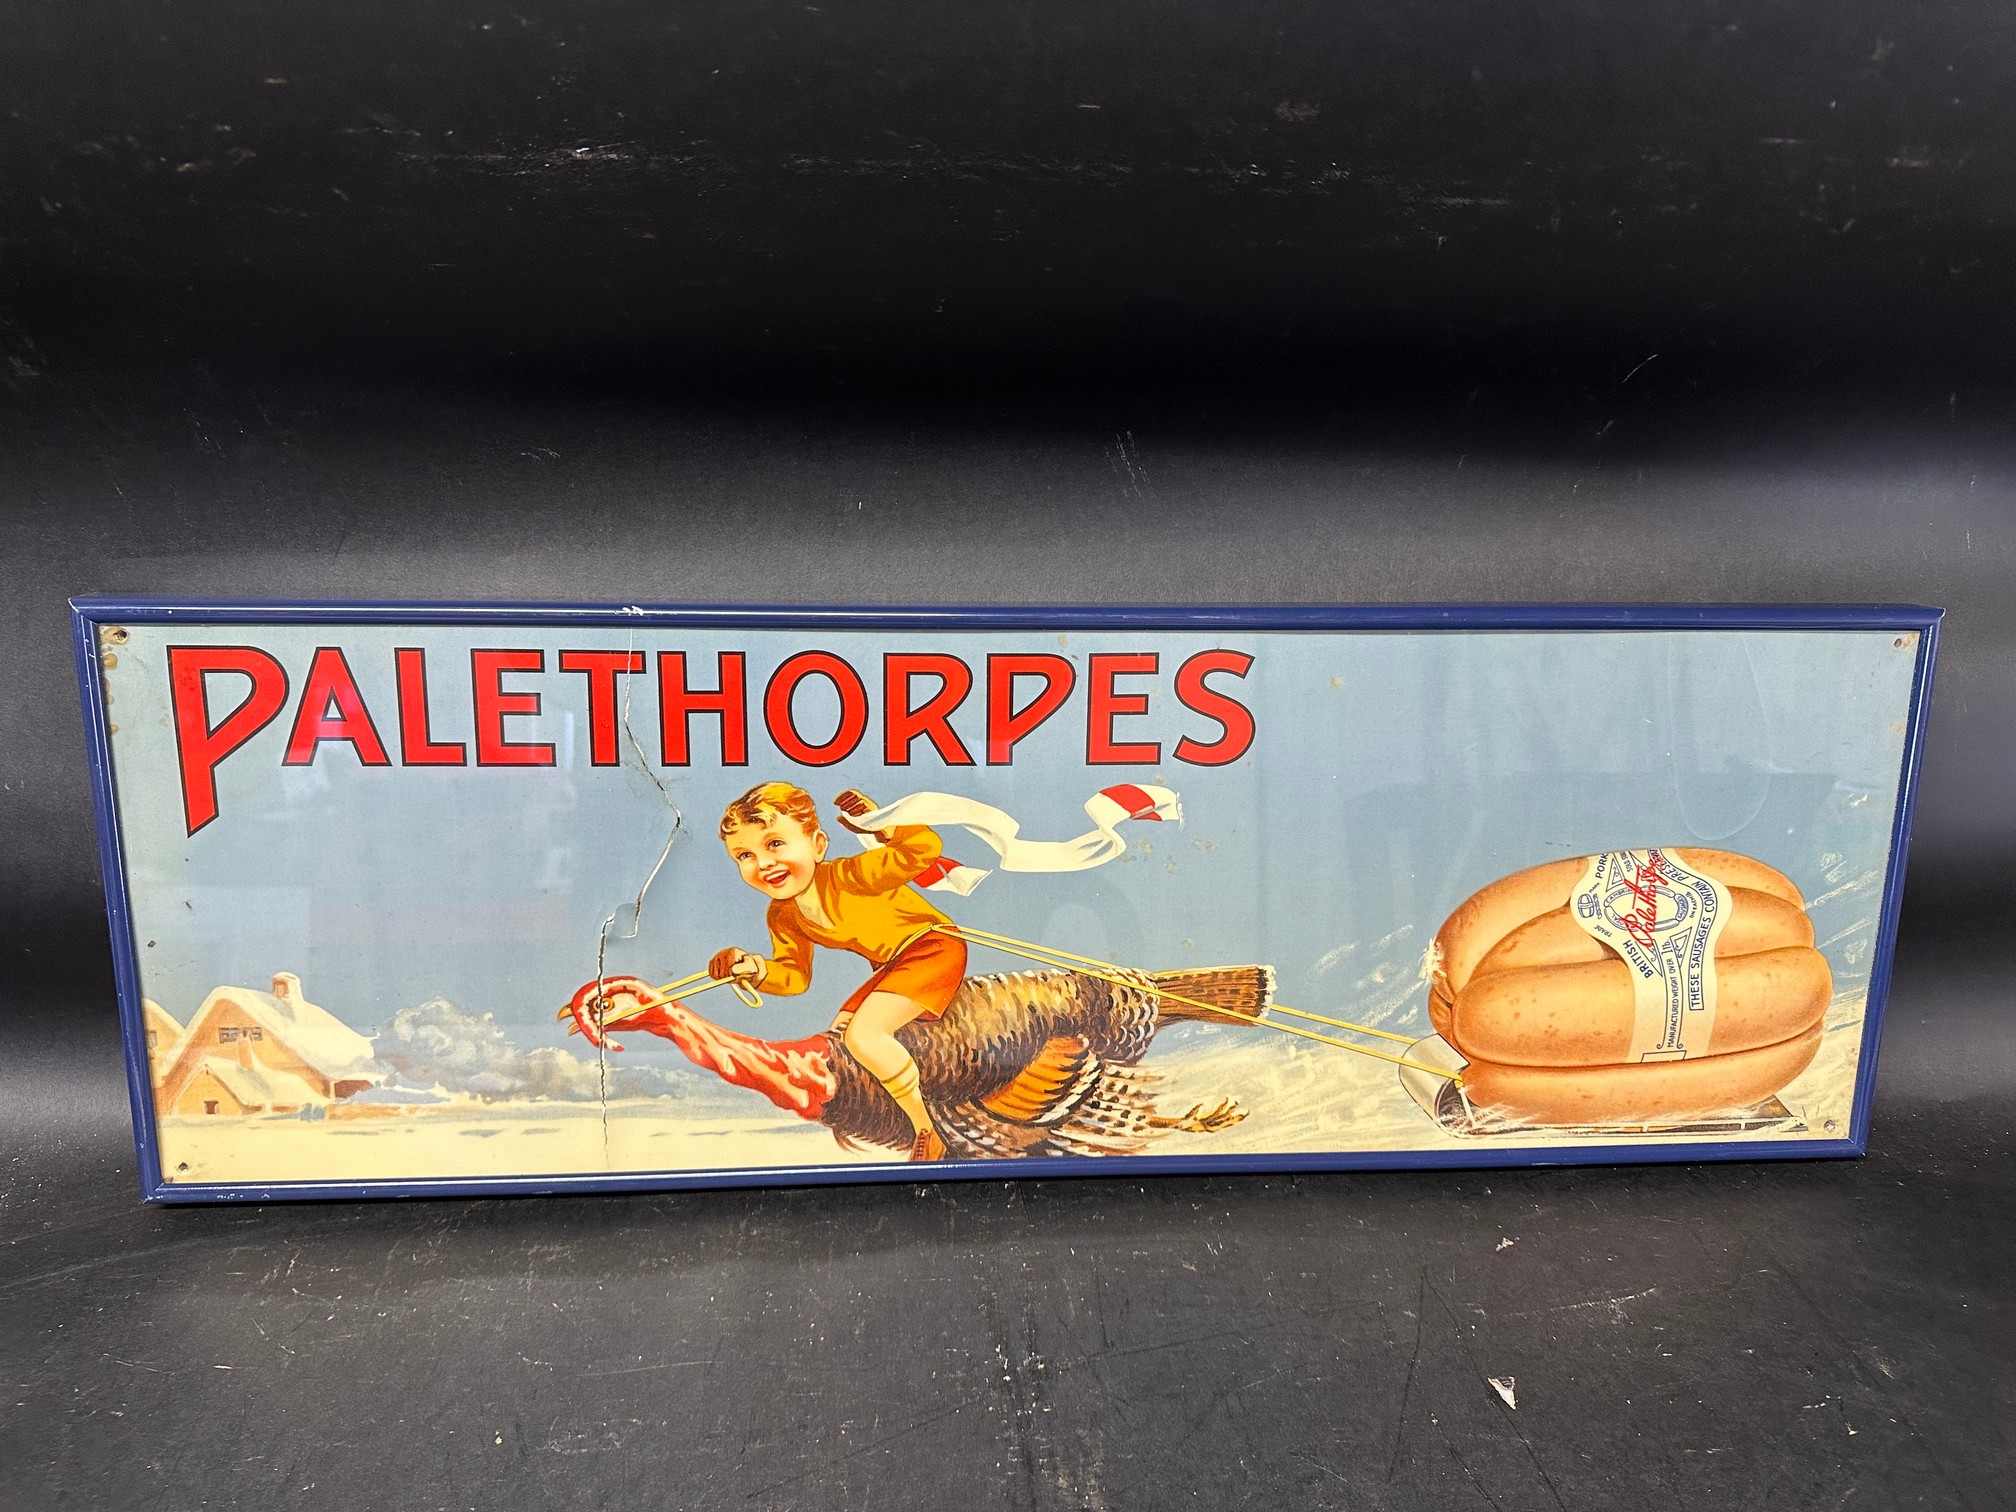 A Palethorpes Sausages advertisement depicting a snow scene of a boy riding a turkey pulling a